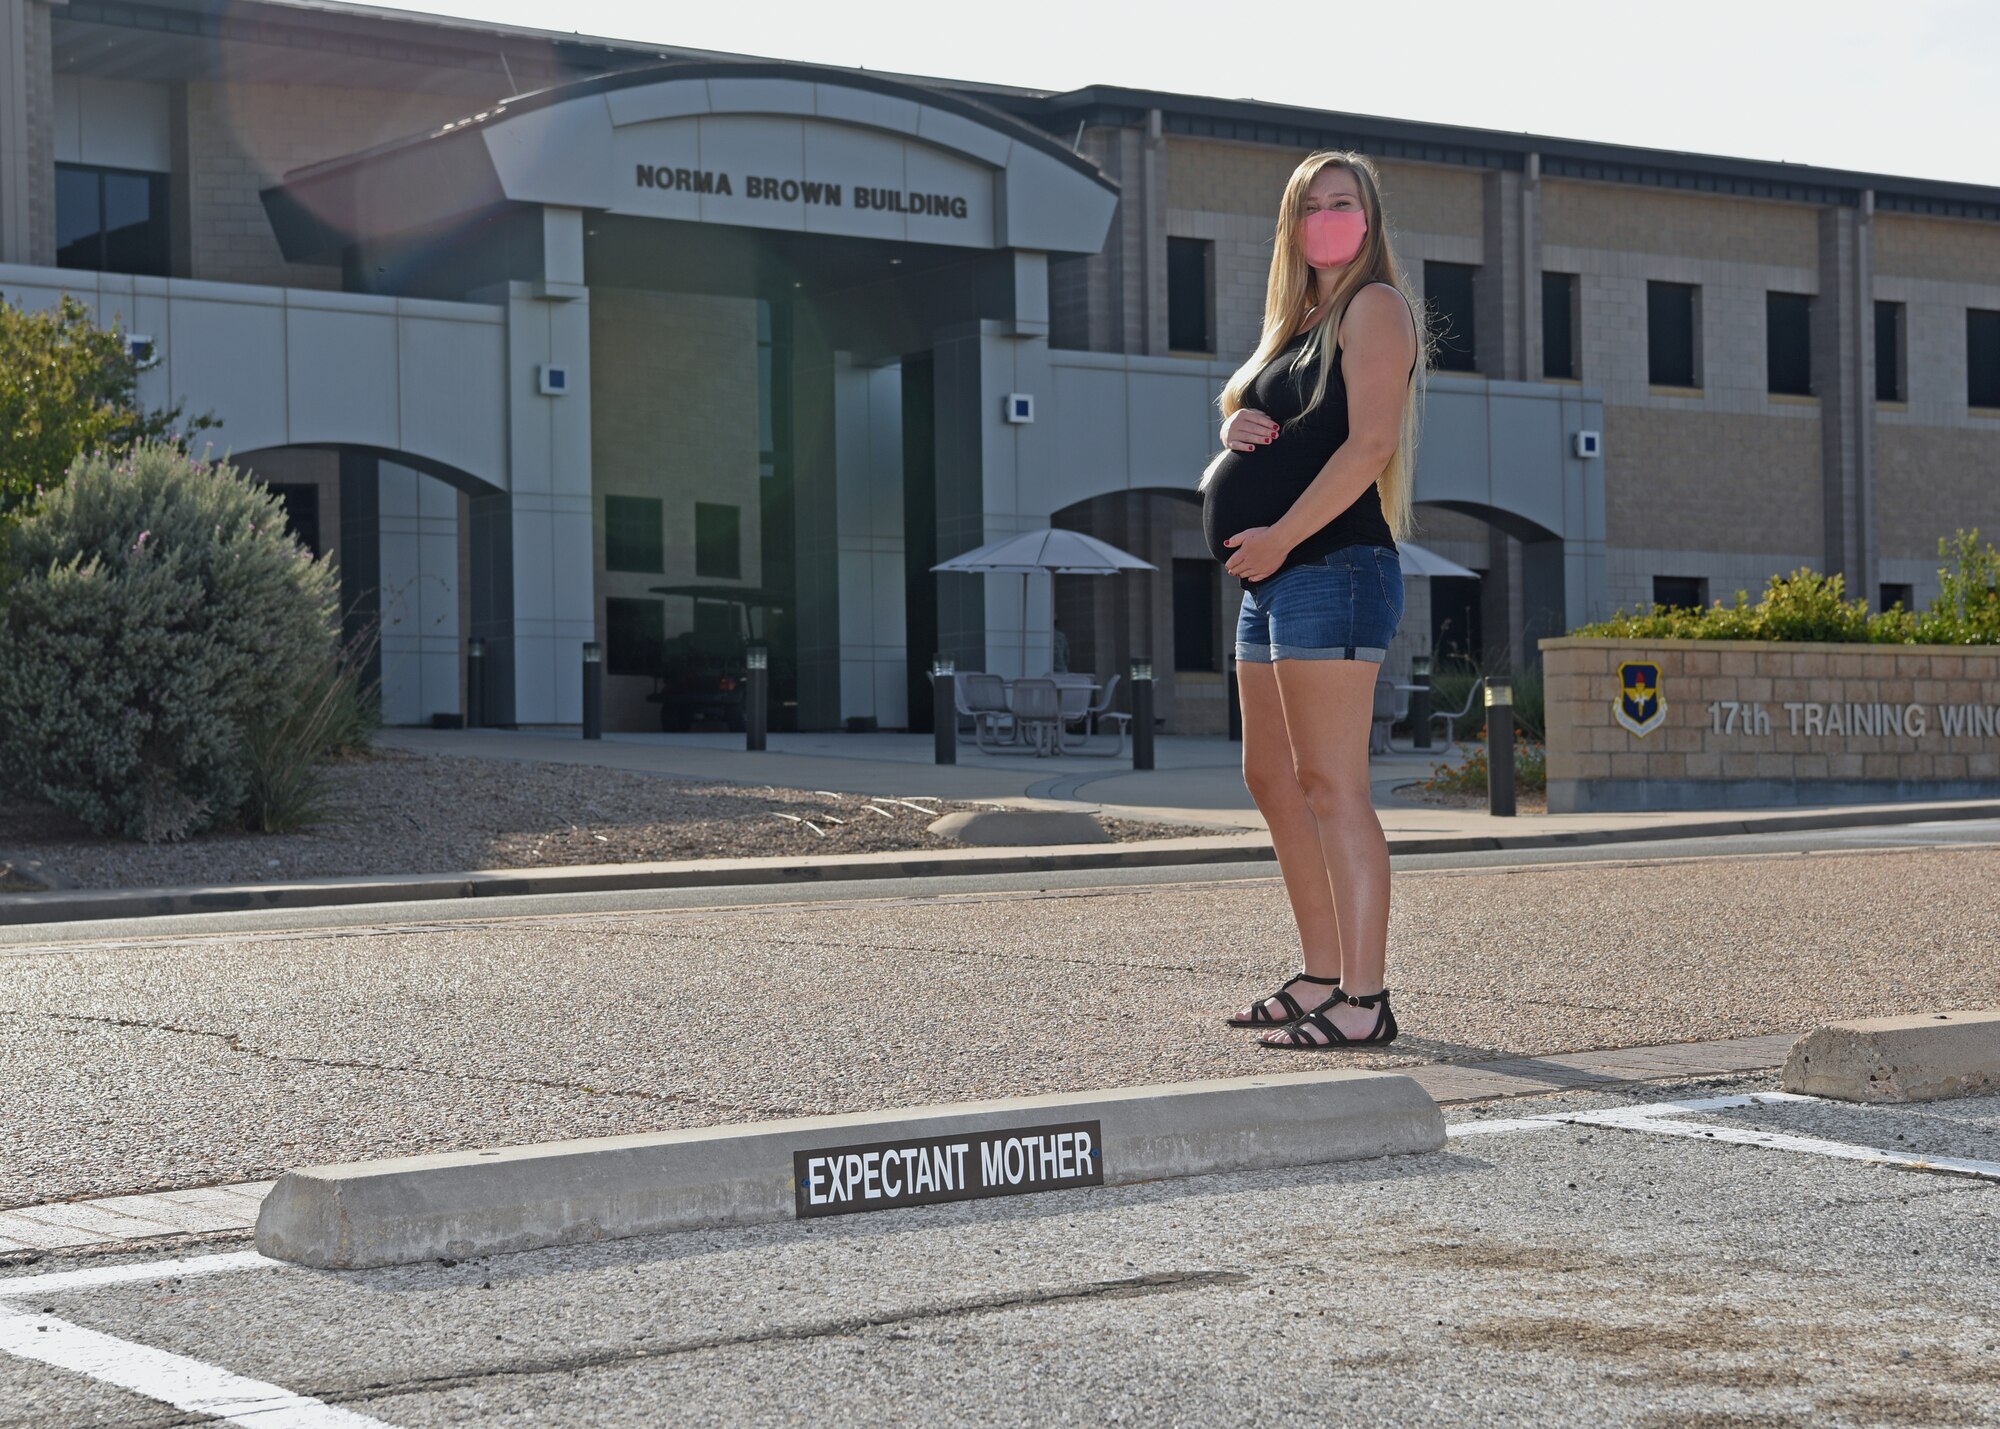 Goodfellow member, Sydney Sherwood displays her 28-week baby bump next to the 17th Training Wing’s newly implemented Expectant Mother’s front row parking outside of the Norma Brown building, on Goodfellow Air Force Base, Texas, Sept. 3, 2020.  Maternity parking spaces are not required by law; they were created to provide more diversity and inclusion resources around the base. (U.S. Air Force photo by Senior Airman Abbey Rieves)